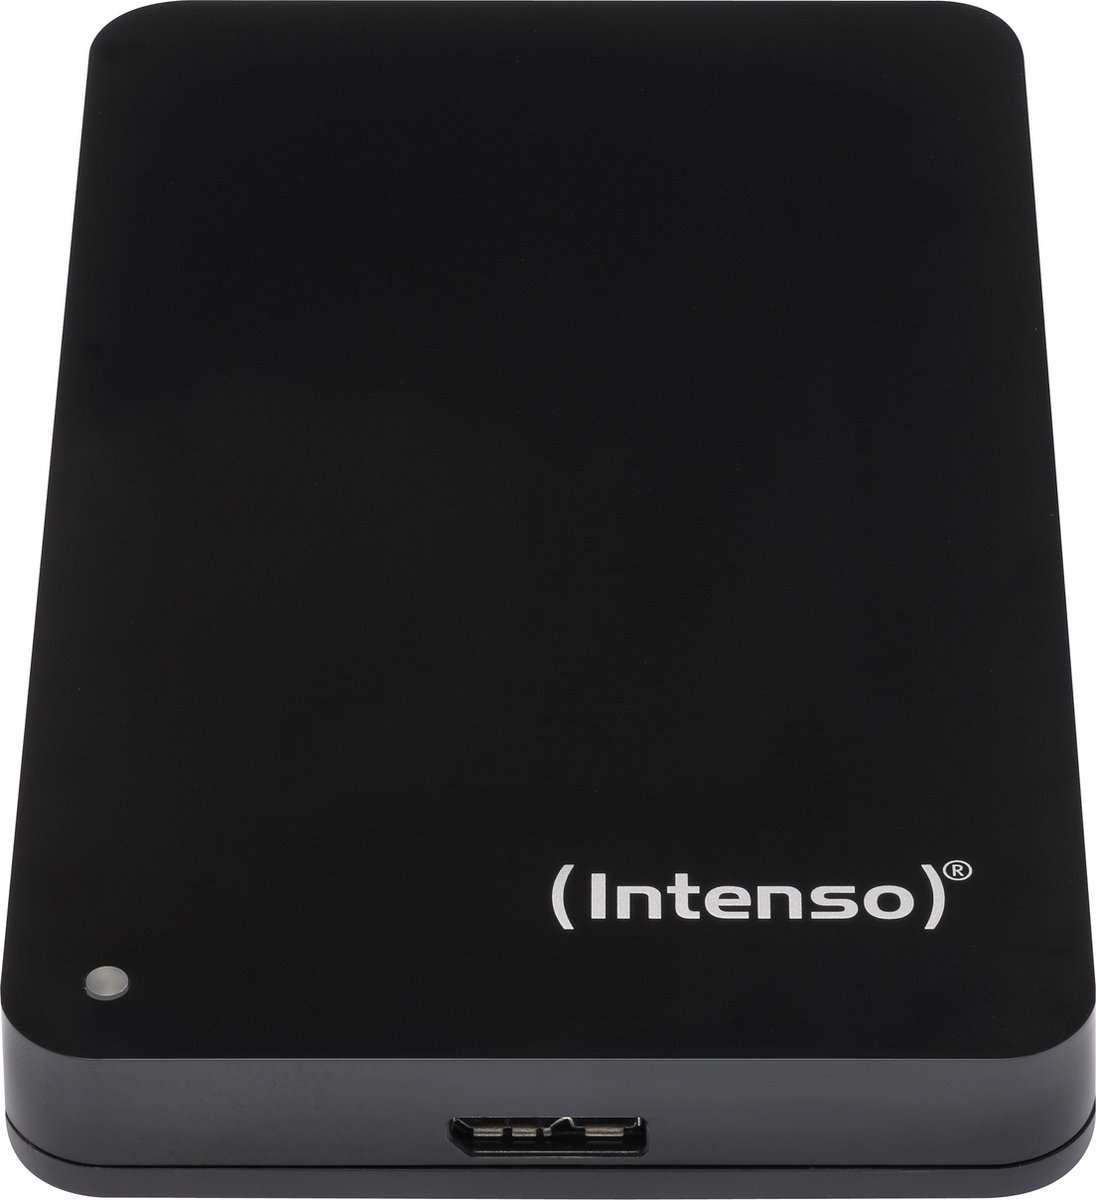 (Intenso) 2,5inch Memory Case 2 TB - Portable Externe HDD - 2TB - USB 3.2 Super Speed